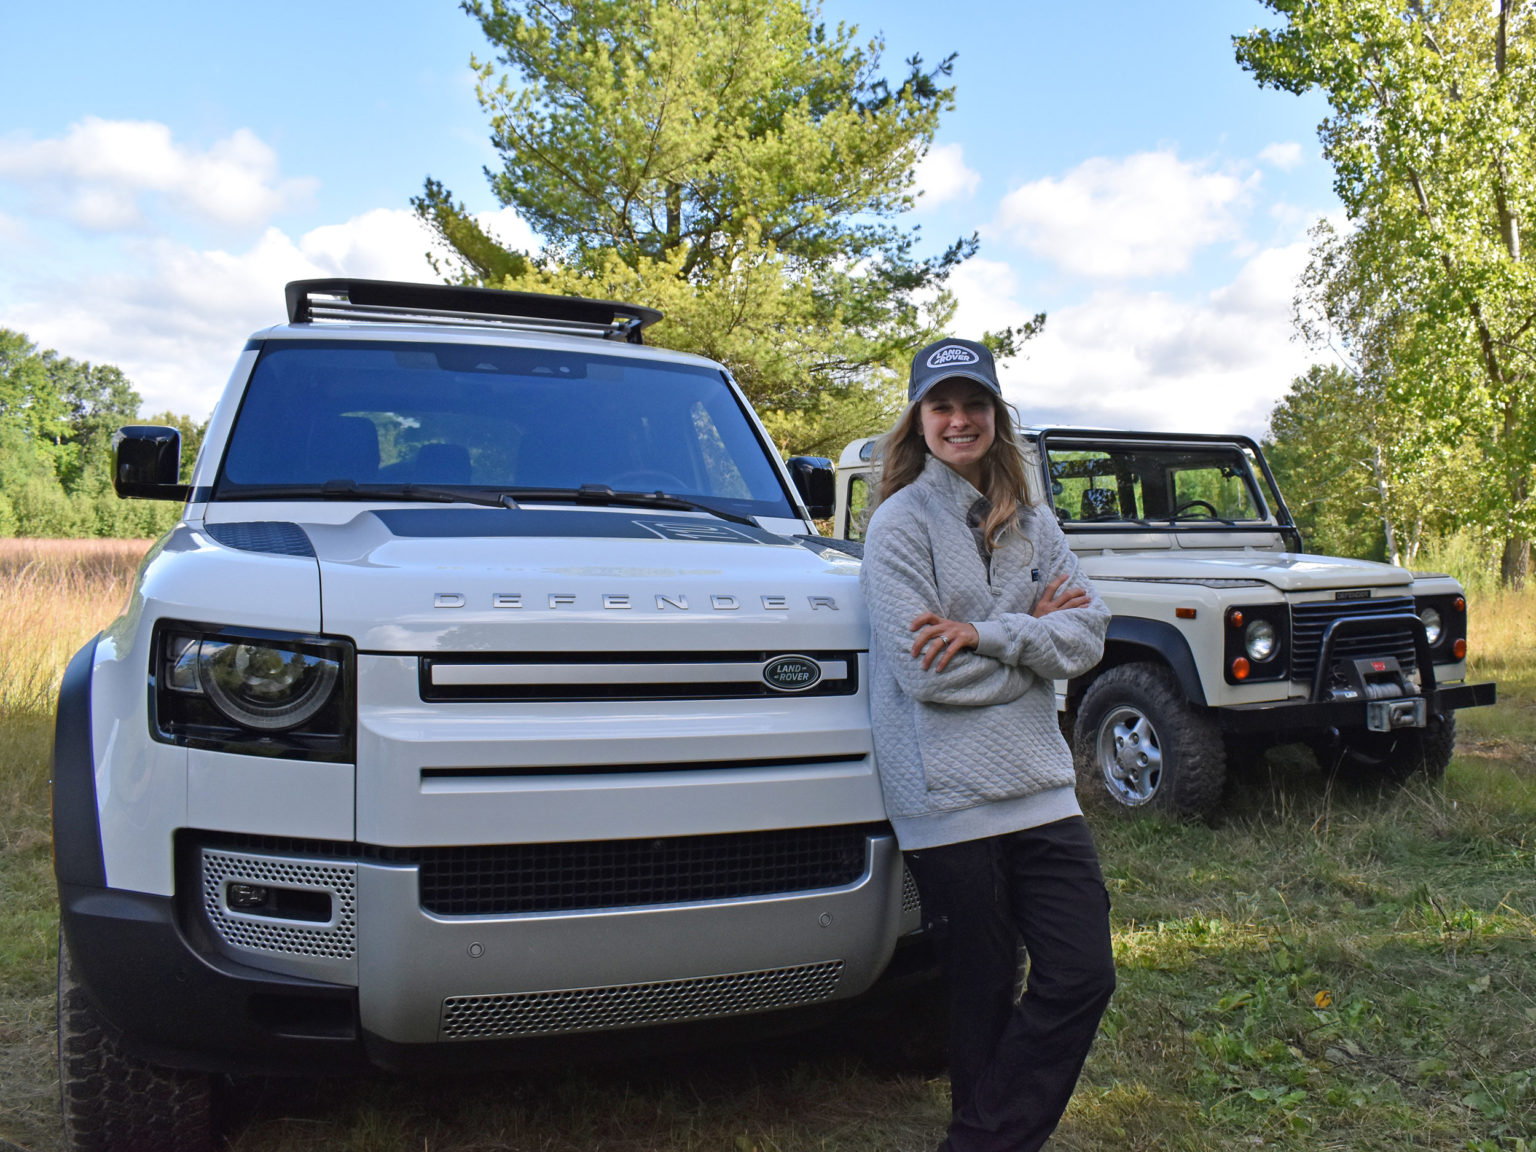 U.S. Ski & Snowboard Cross Country athlete and 2018 gold medalist Jesse Diggins took a Land Rover Defender out on the trails at the Center in Vermont this week.